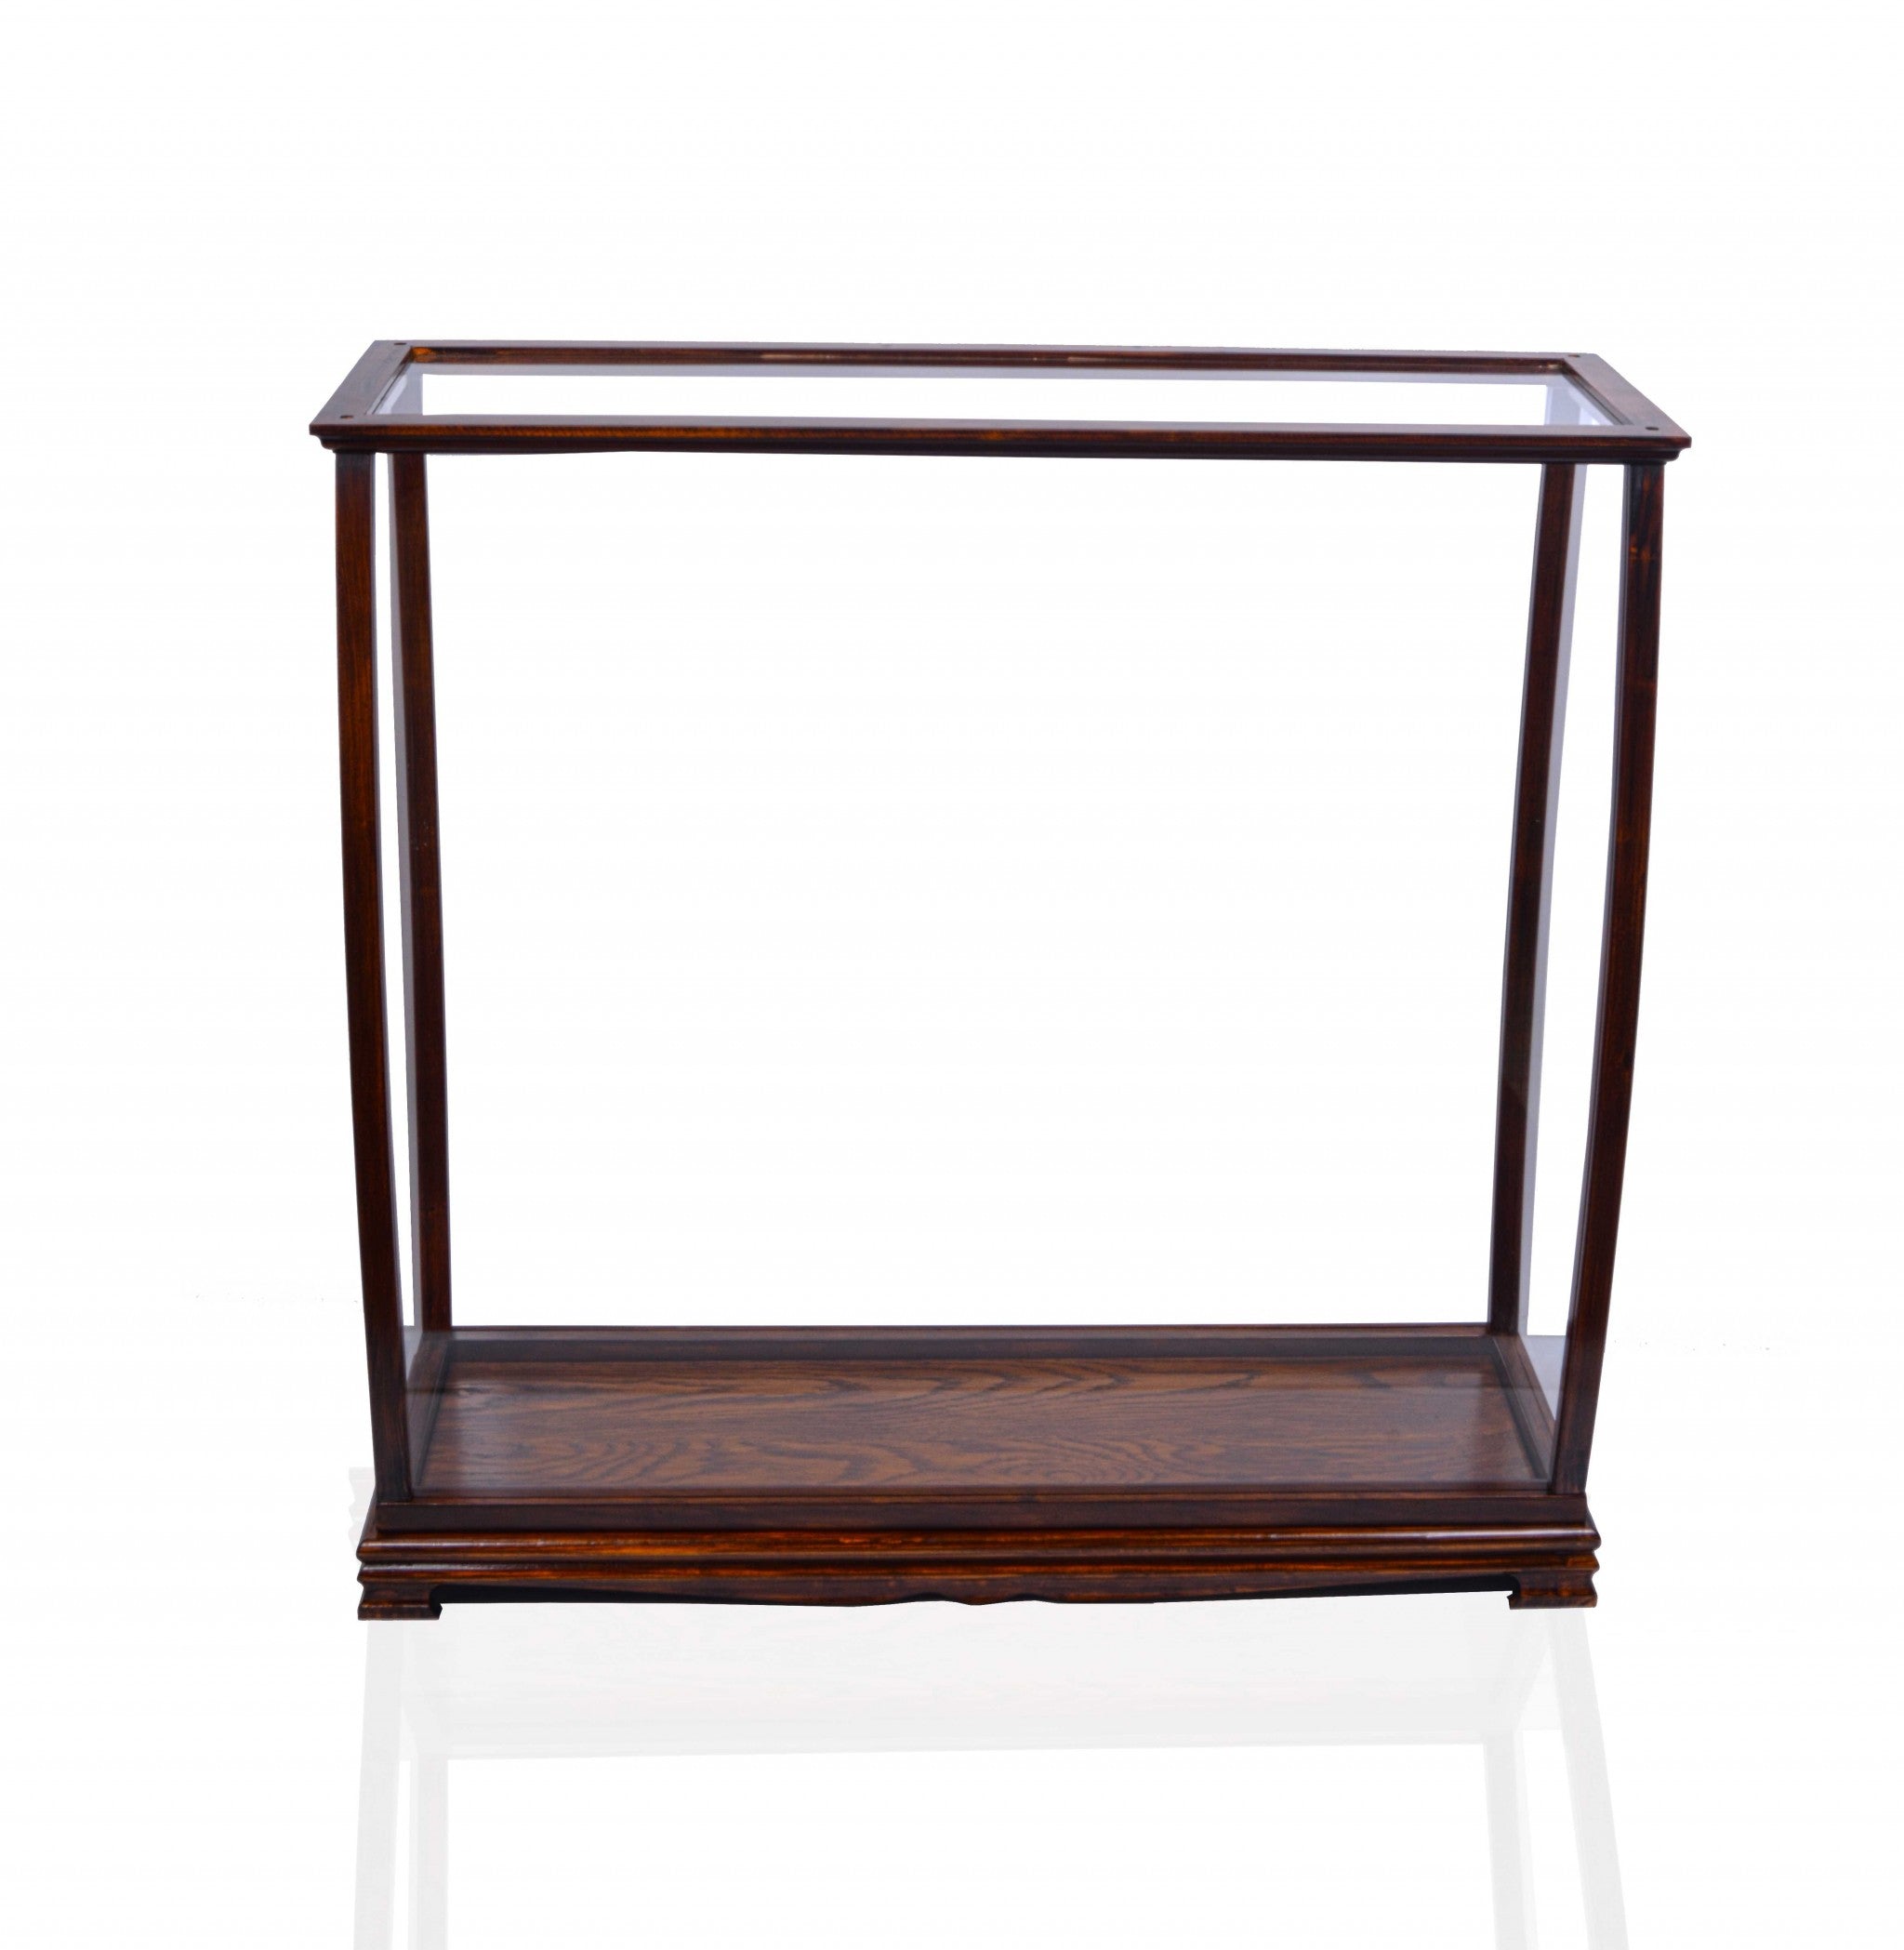 13.75" x 40" x 39.25" BrownTable Top Display Case Classic